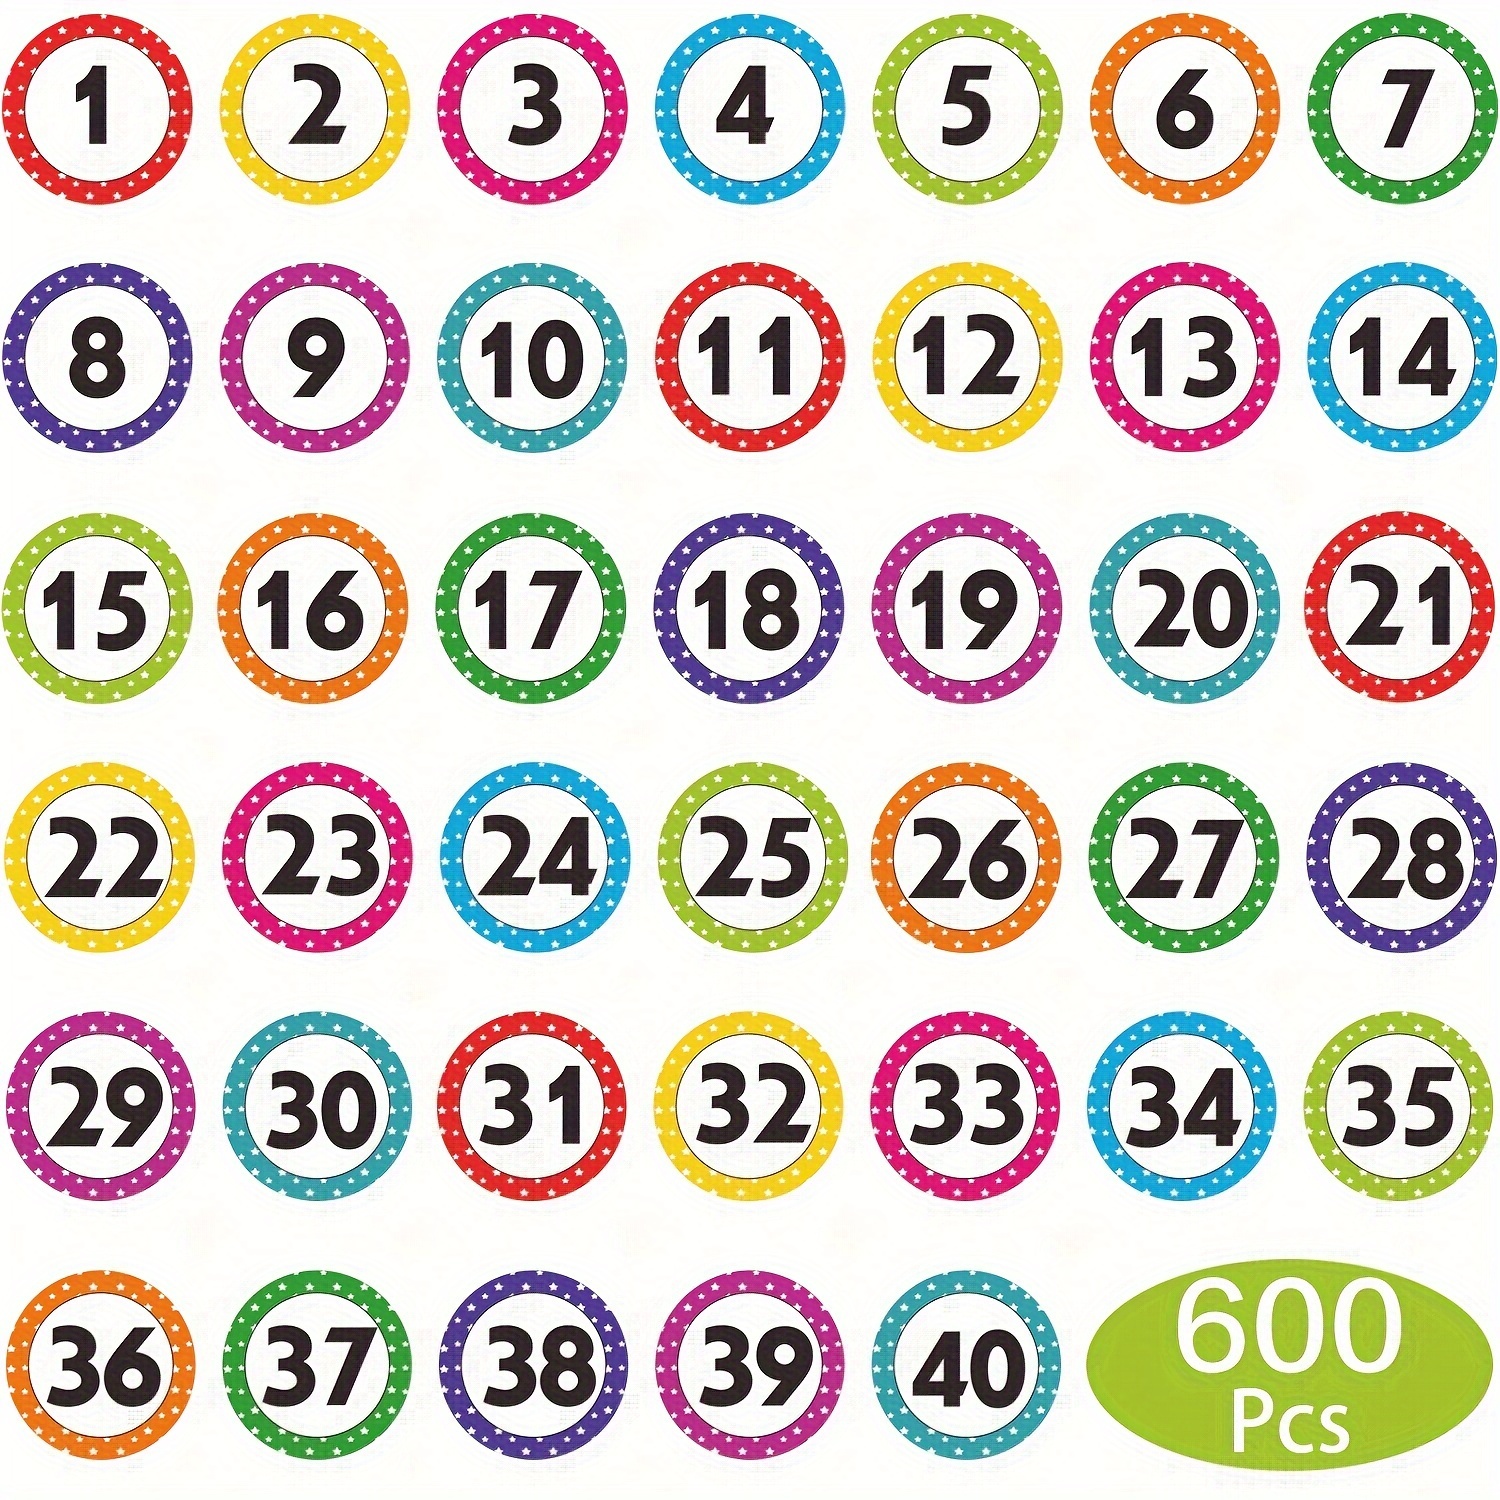 

400pcs/600pcs Number Stickers 1-40, 10/15 Sheets 1" Dot Consecutive Number Labels Self-adhesive Water/tear Resistant Number Stickers Without Residue For Office, Classroom, Indoor, Boxes, Storage